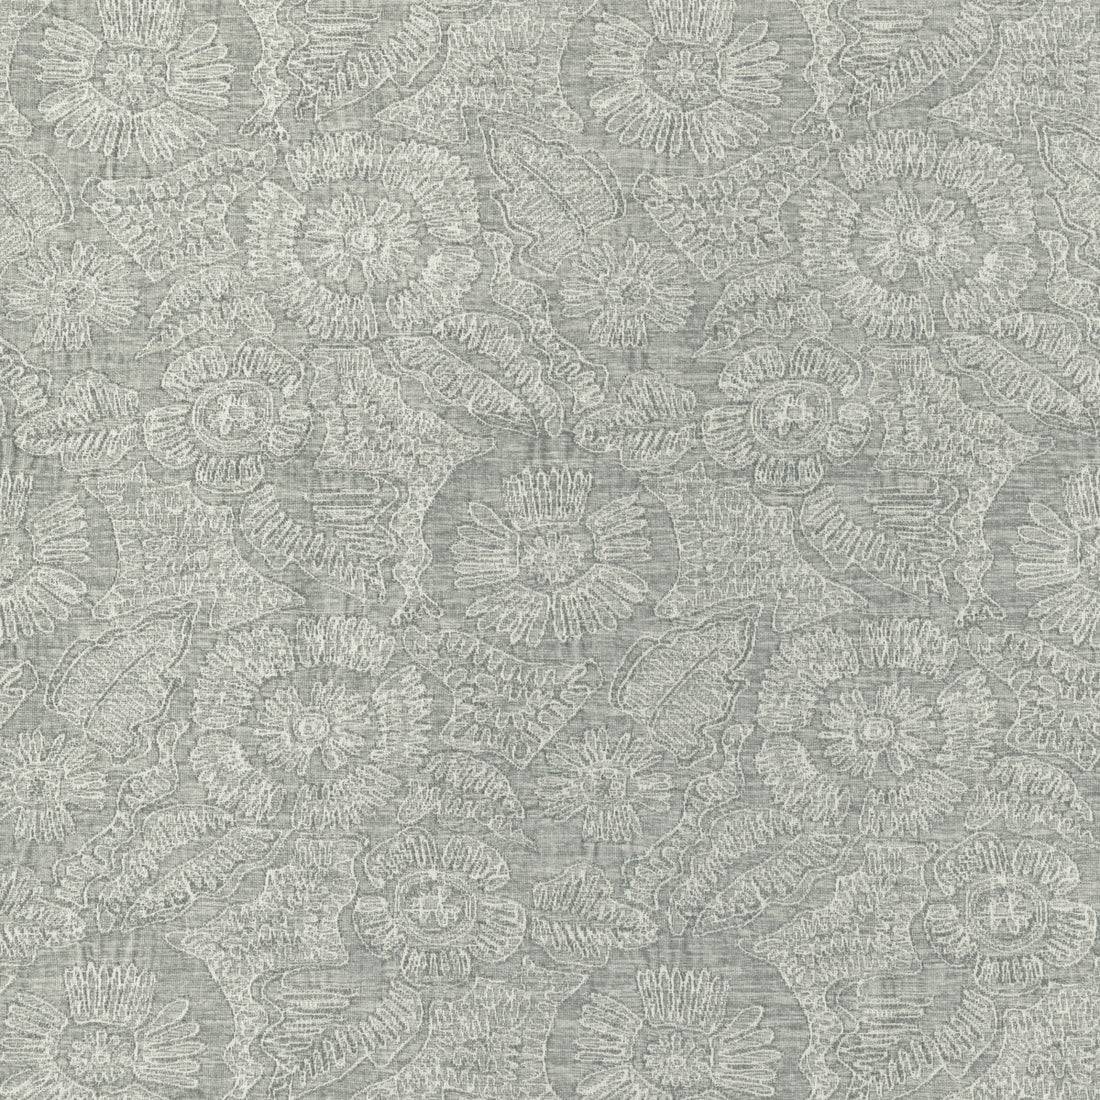 Chenille Bloom fabric in mist color - pattern 36889.15.0 - by Kravet Couture in the Atelier Weaves collection